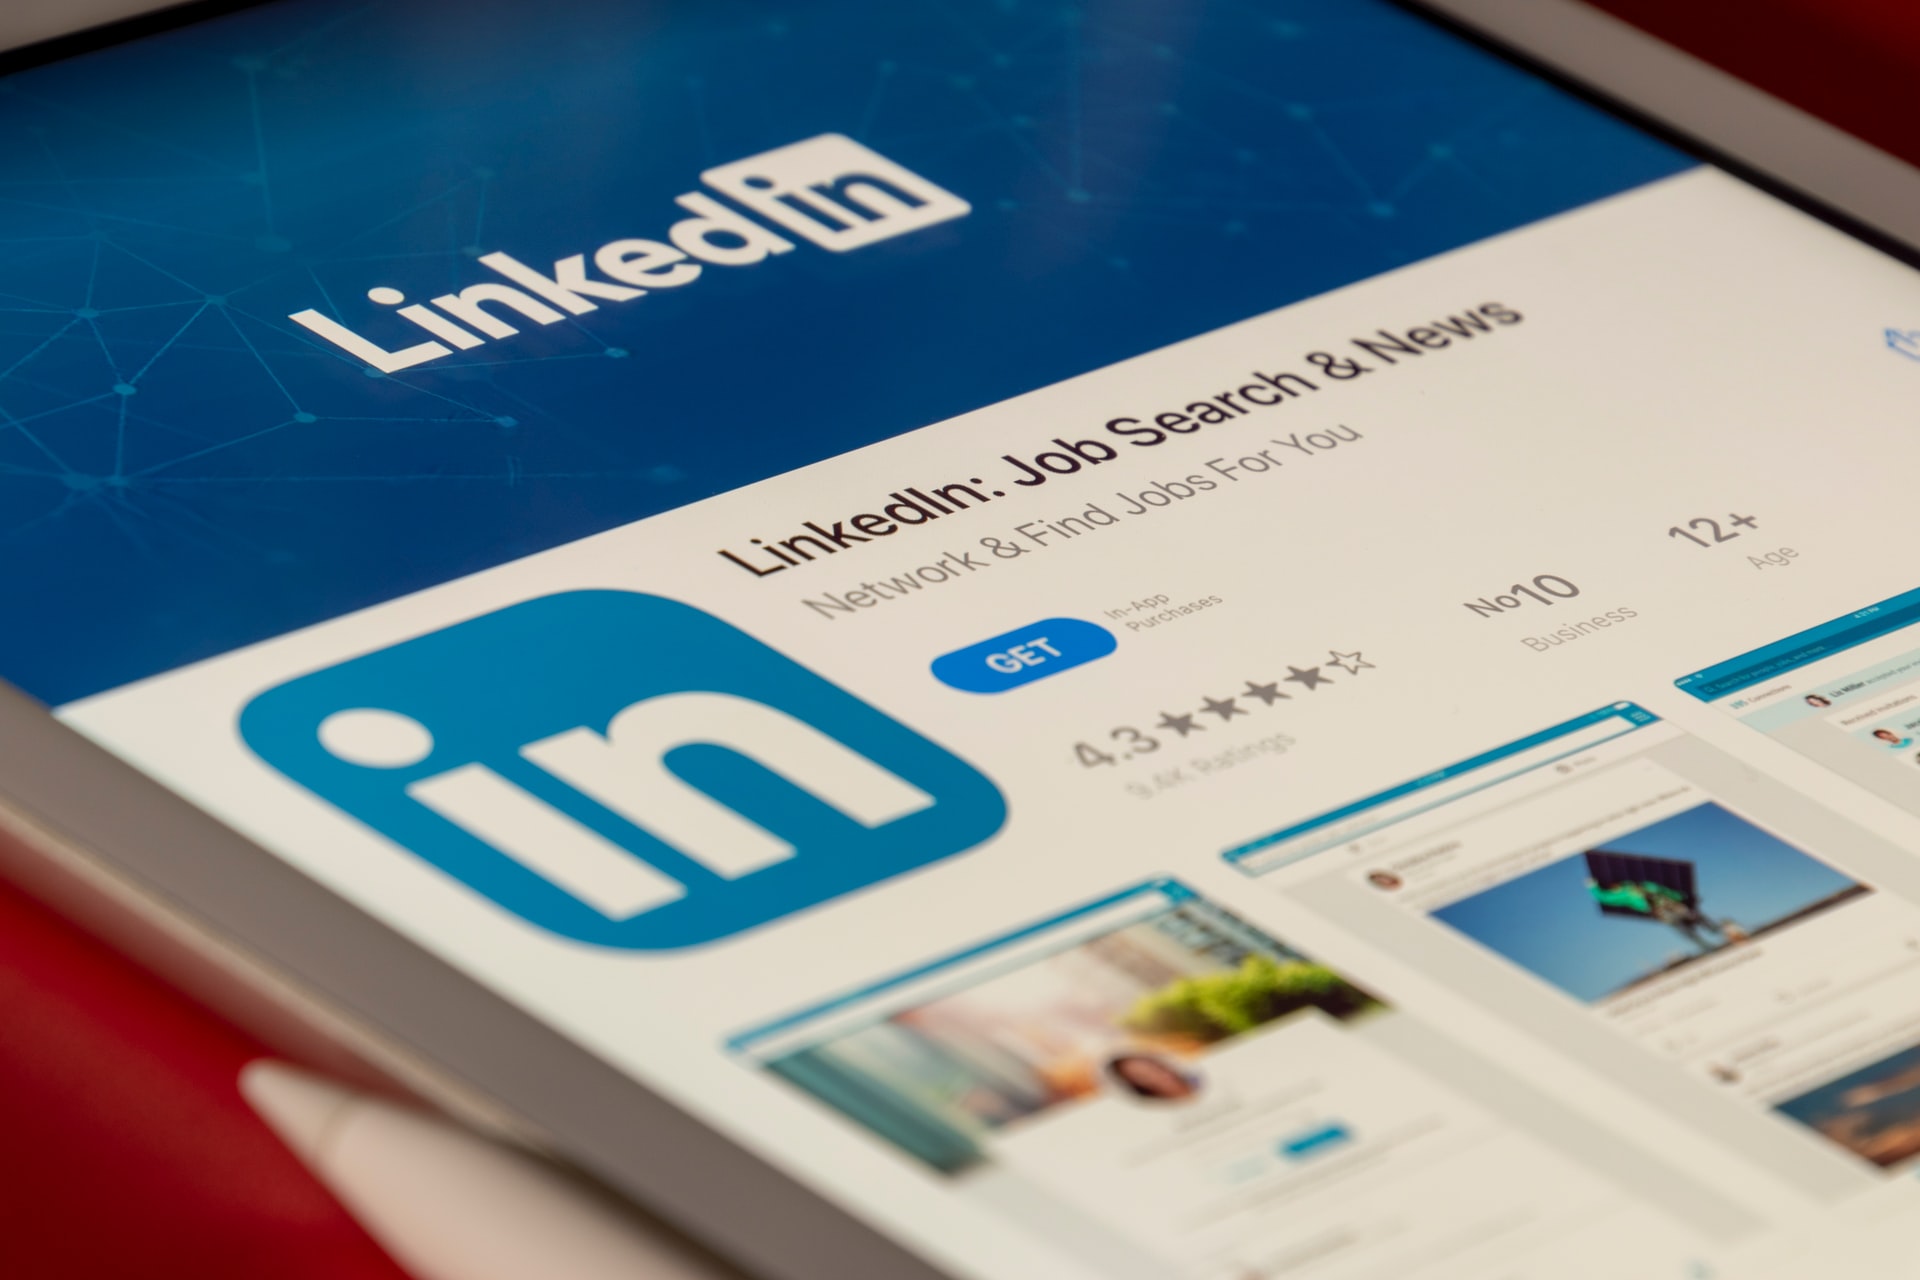 Tips to Polish Up Your LinkedIn Presence (And Why You Should) Tucson